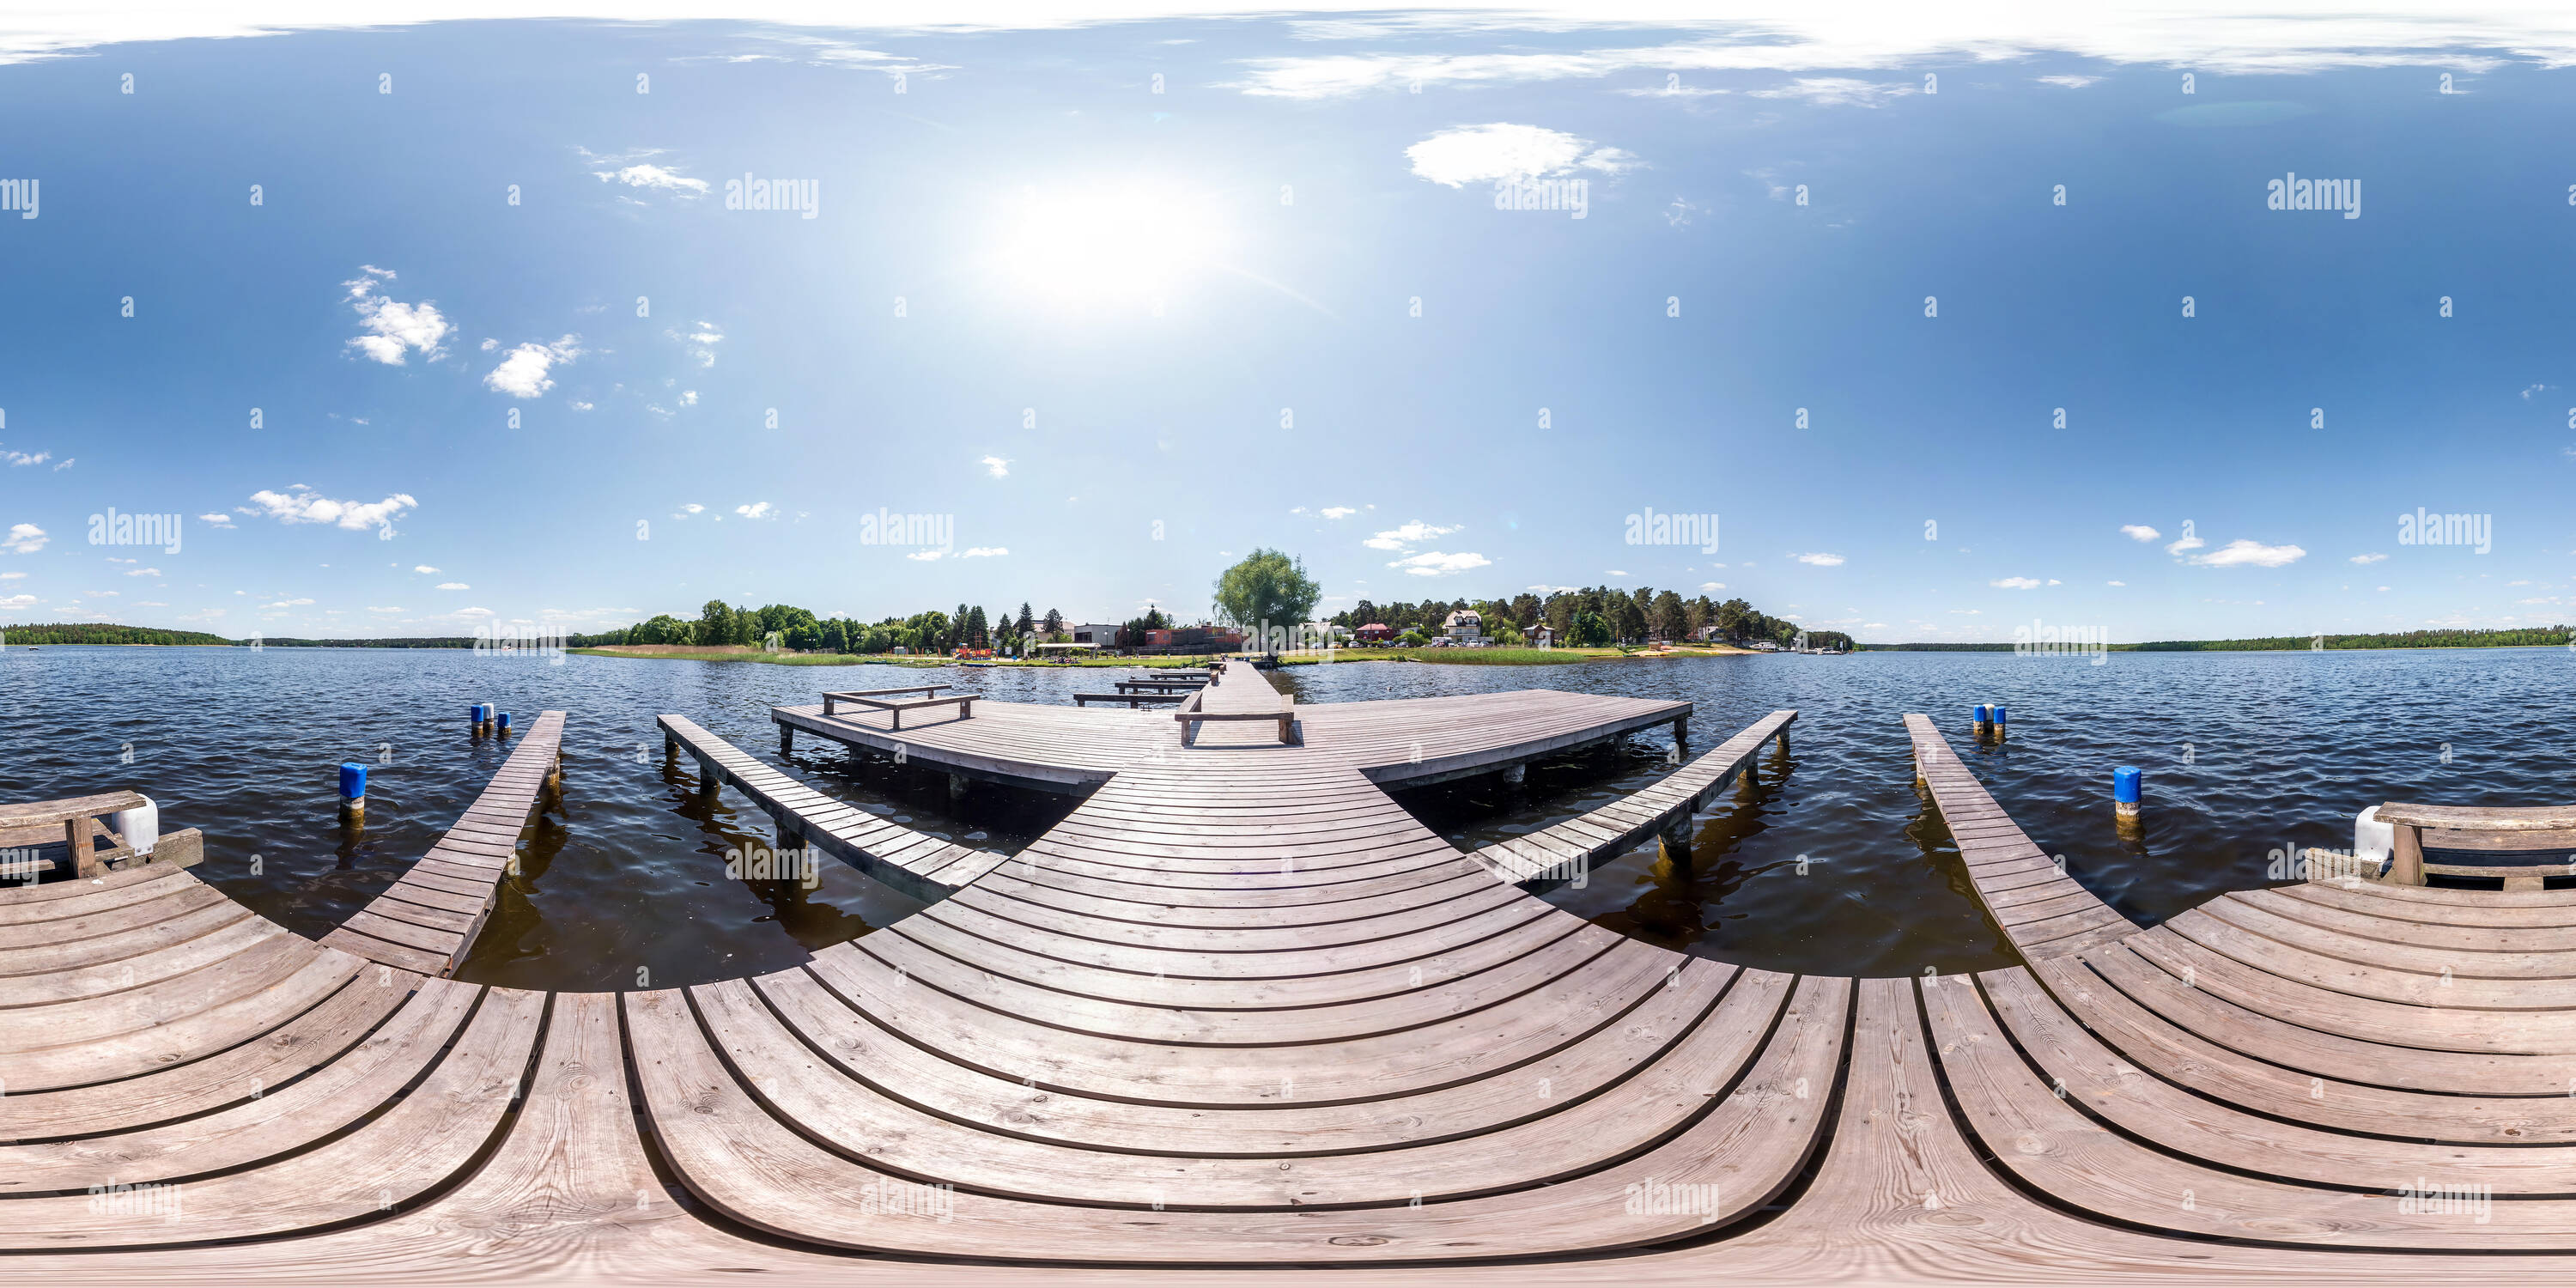 360-view-of-full-seamless-panorama-360-by-180-angle-view-wooden-pier-for-ships-on-huge-forest